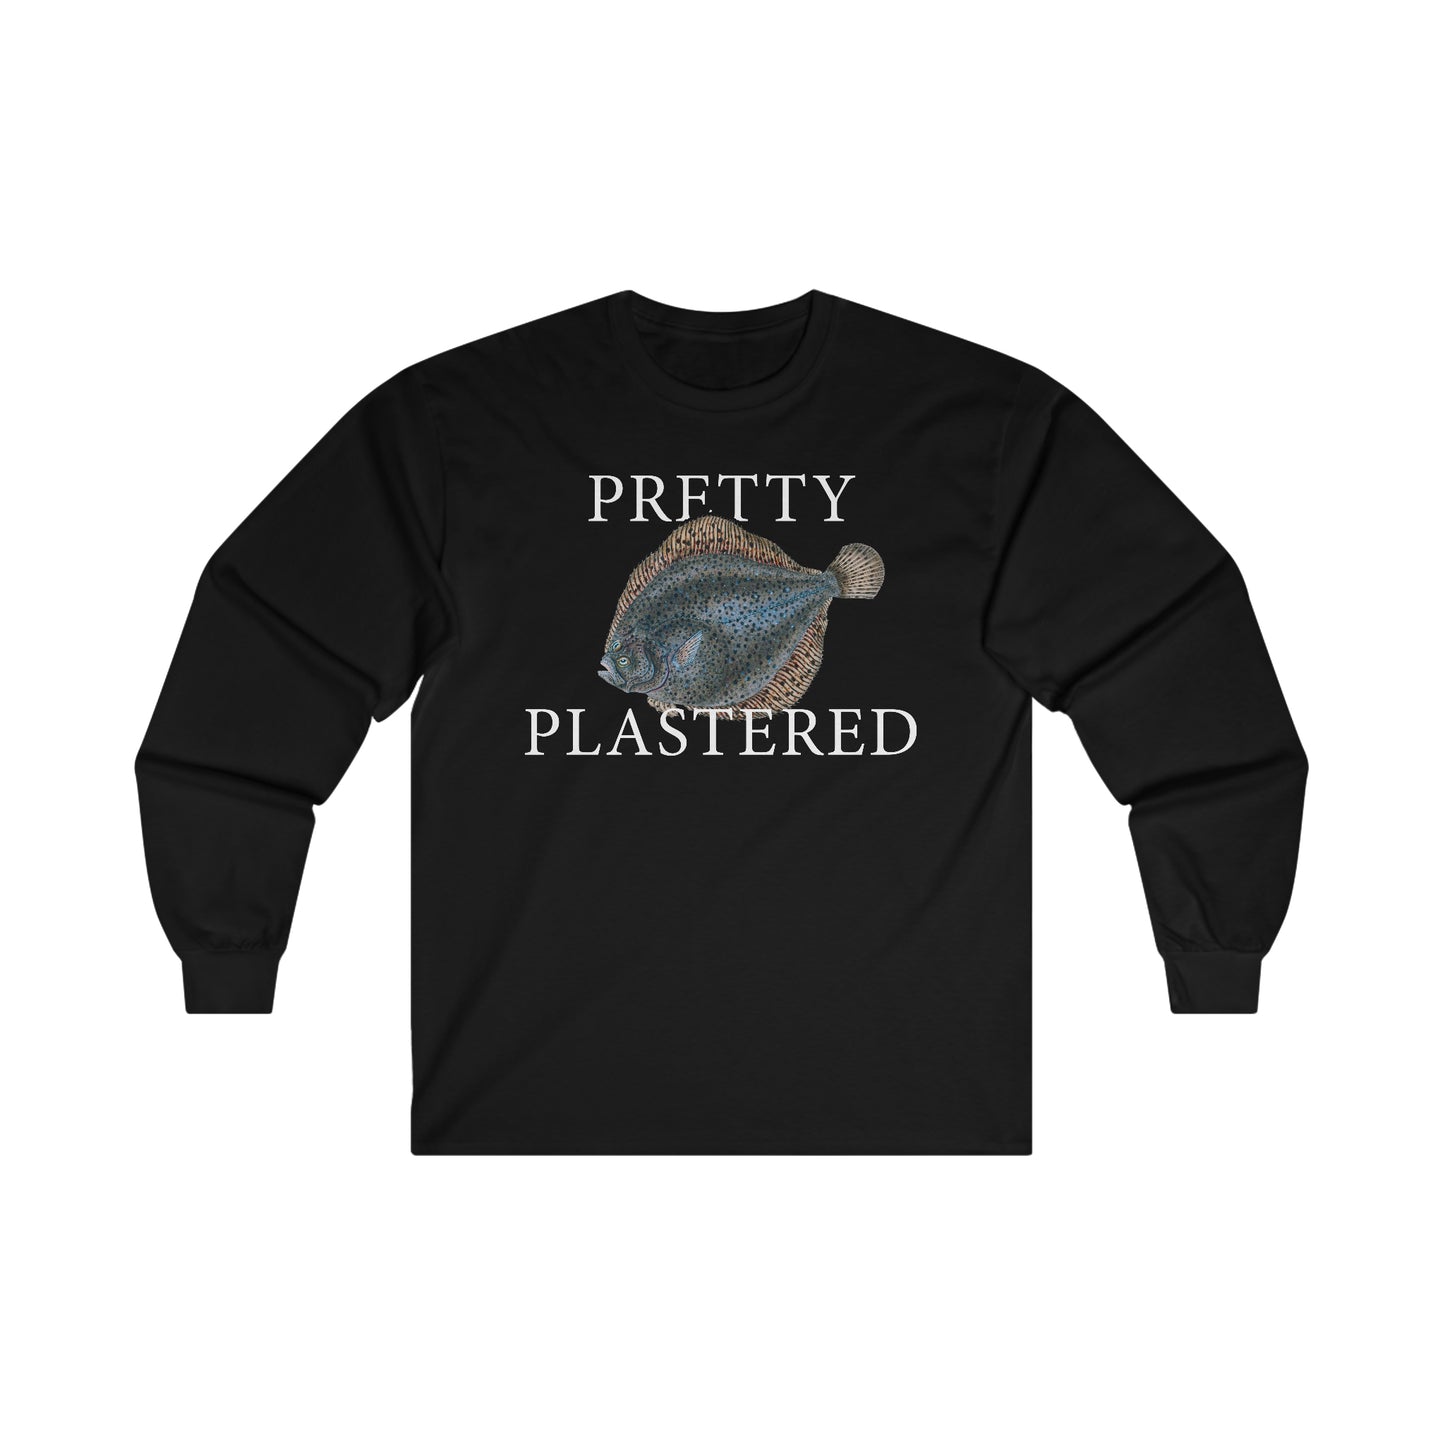 Pretty Plastered - Long Edition